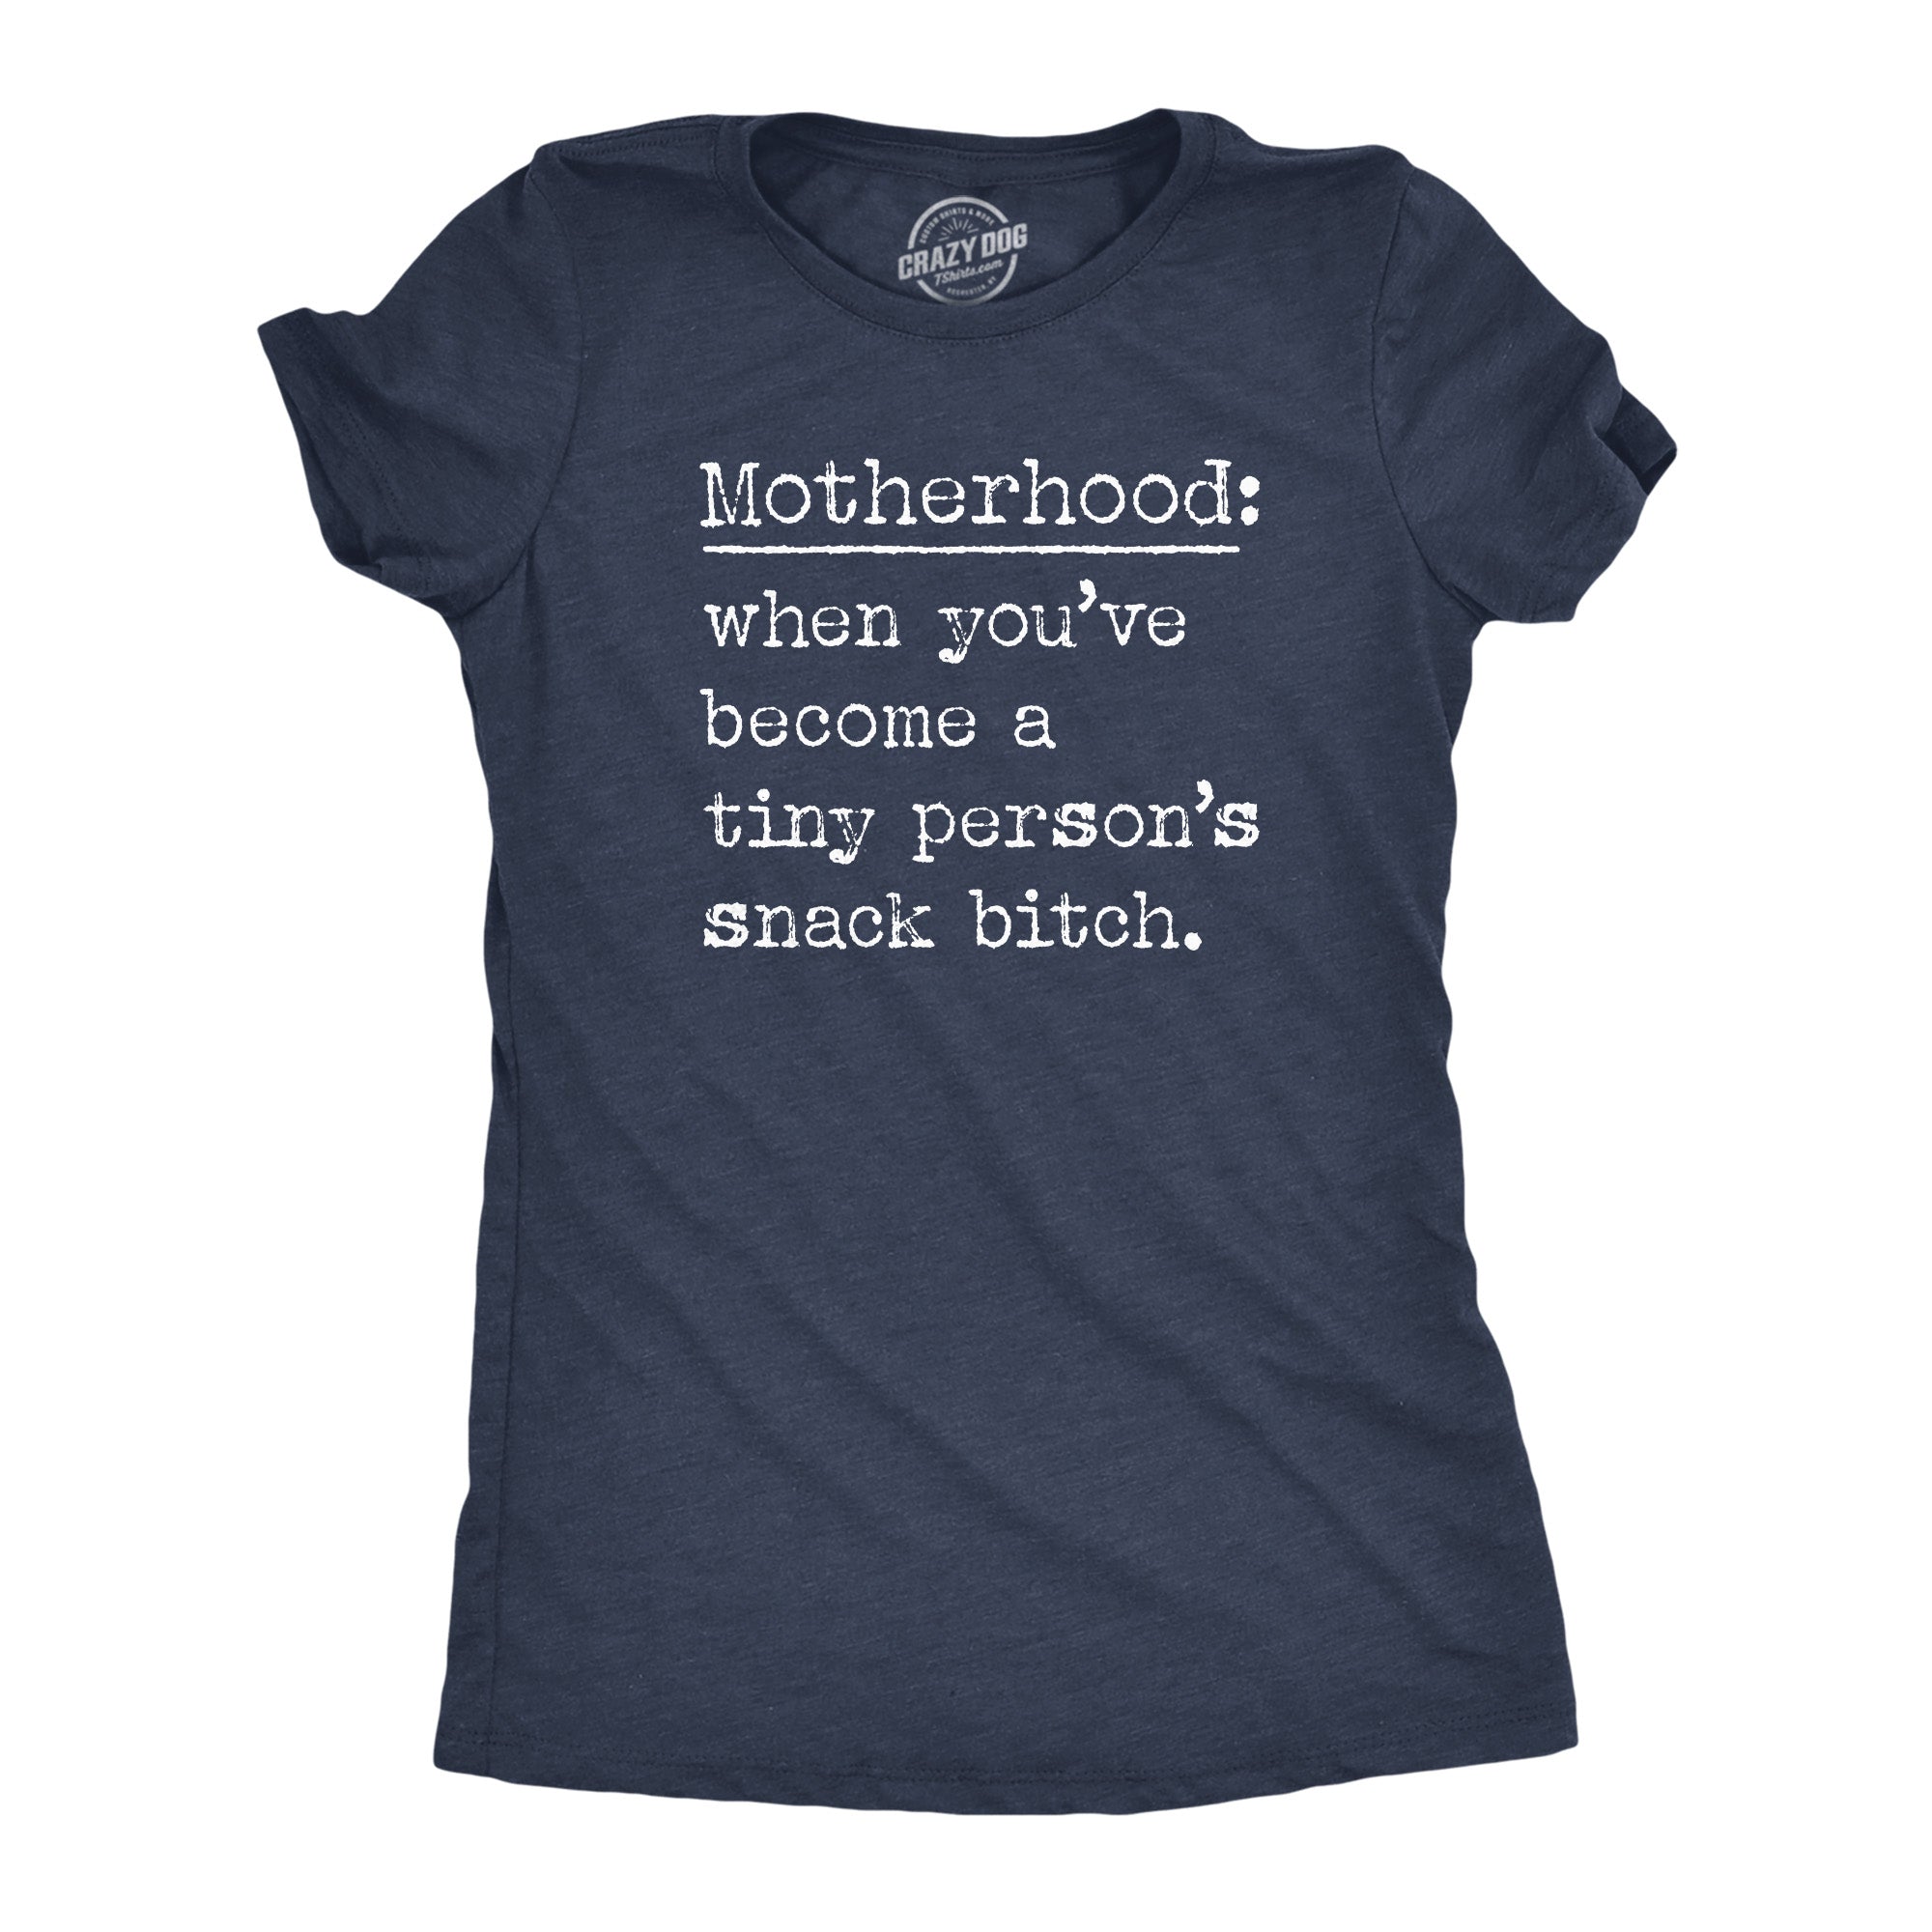 Funny Heather Navy - Motherhood Motherhood When Youve Become A Tiny Persons Snack Bitch Womens T Shirt Nerdy Mother's Day Sarcastic Tee